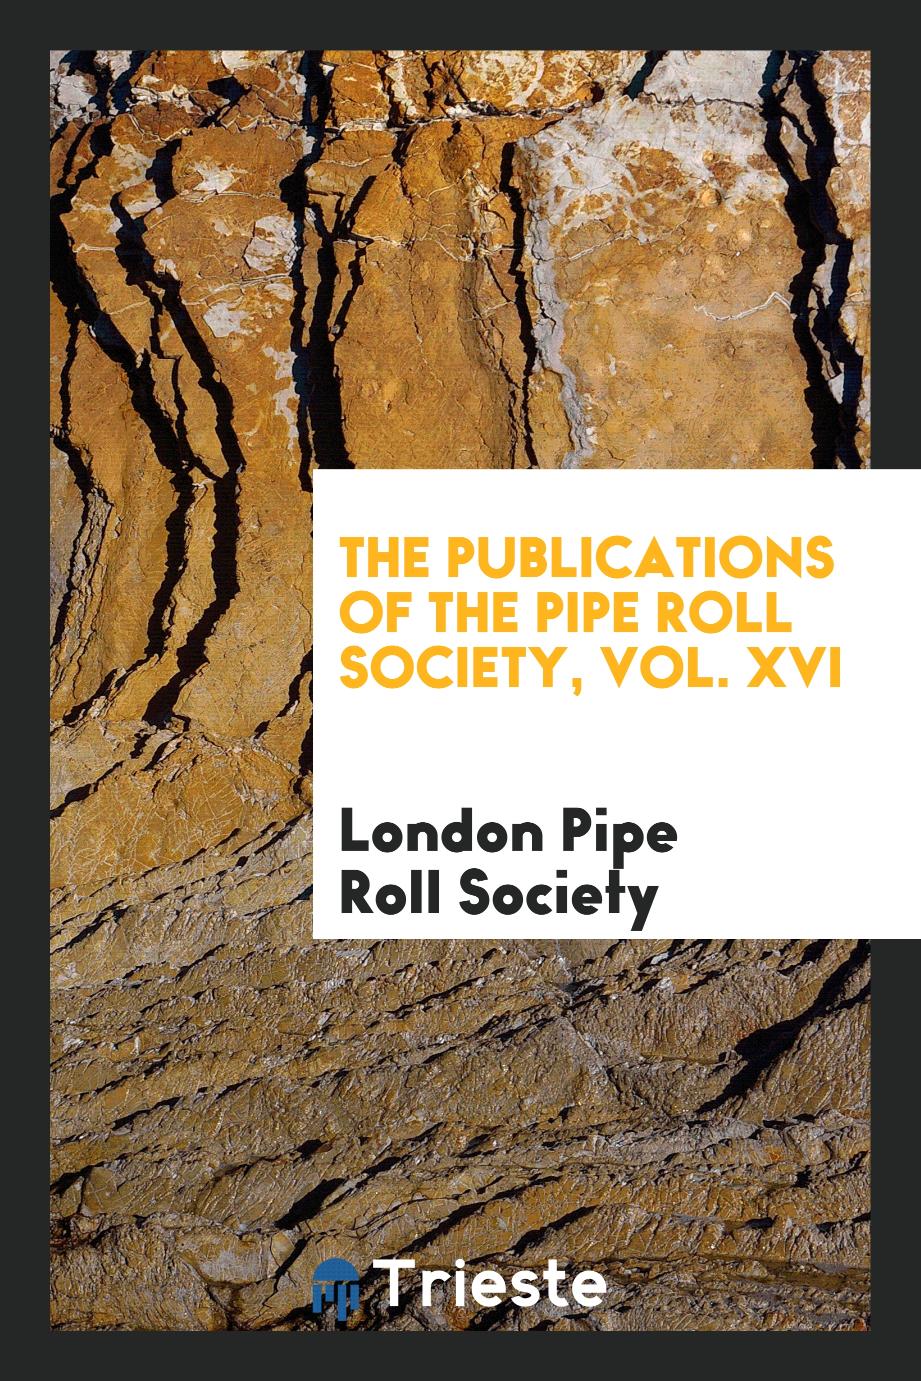 The Publications of the Pipe Roll Society, Vol. XVI